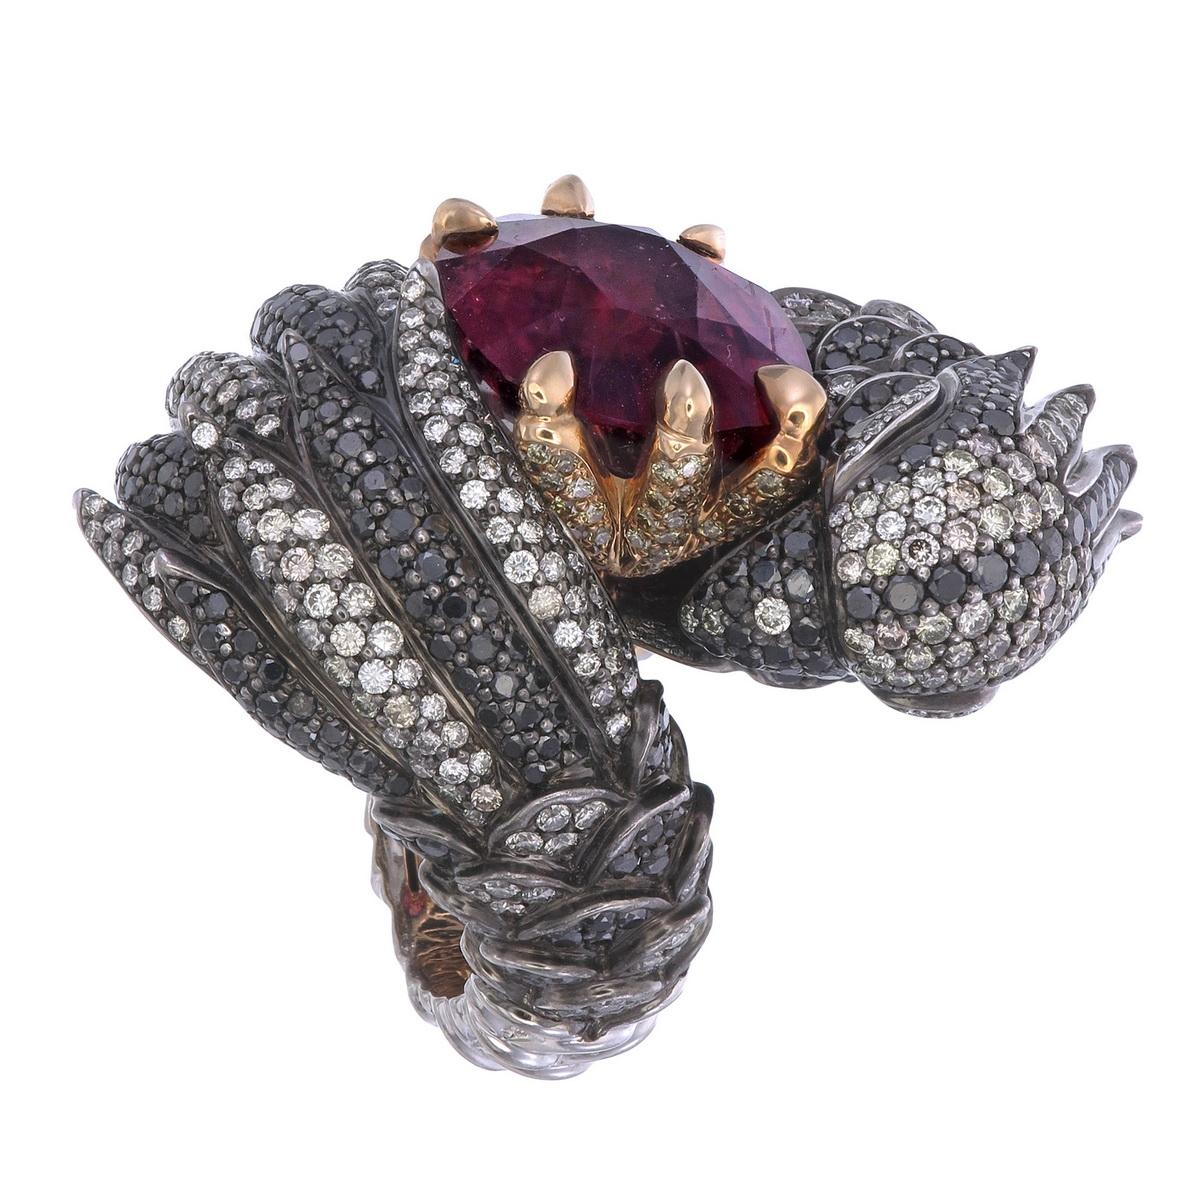 Sauvage Collection- one of a kind.
Unveil the dazzling 3.87-carats black diamond enigmatic eagle ring that possesses a vibrant 21.83-carats Rubellite in its claw. Beholds the exquisite play of 1.53-carats of fancy diamonds glazed and embodies the